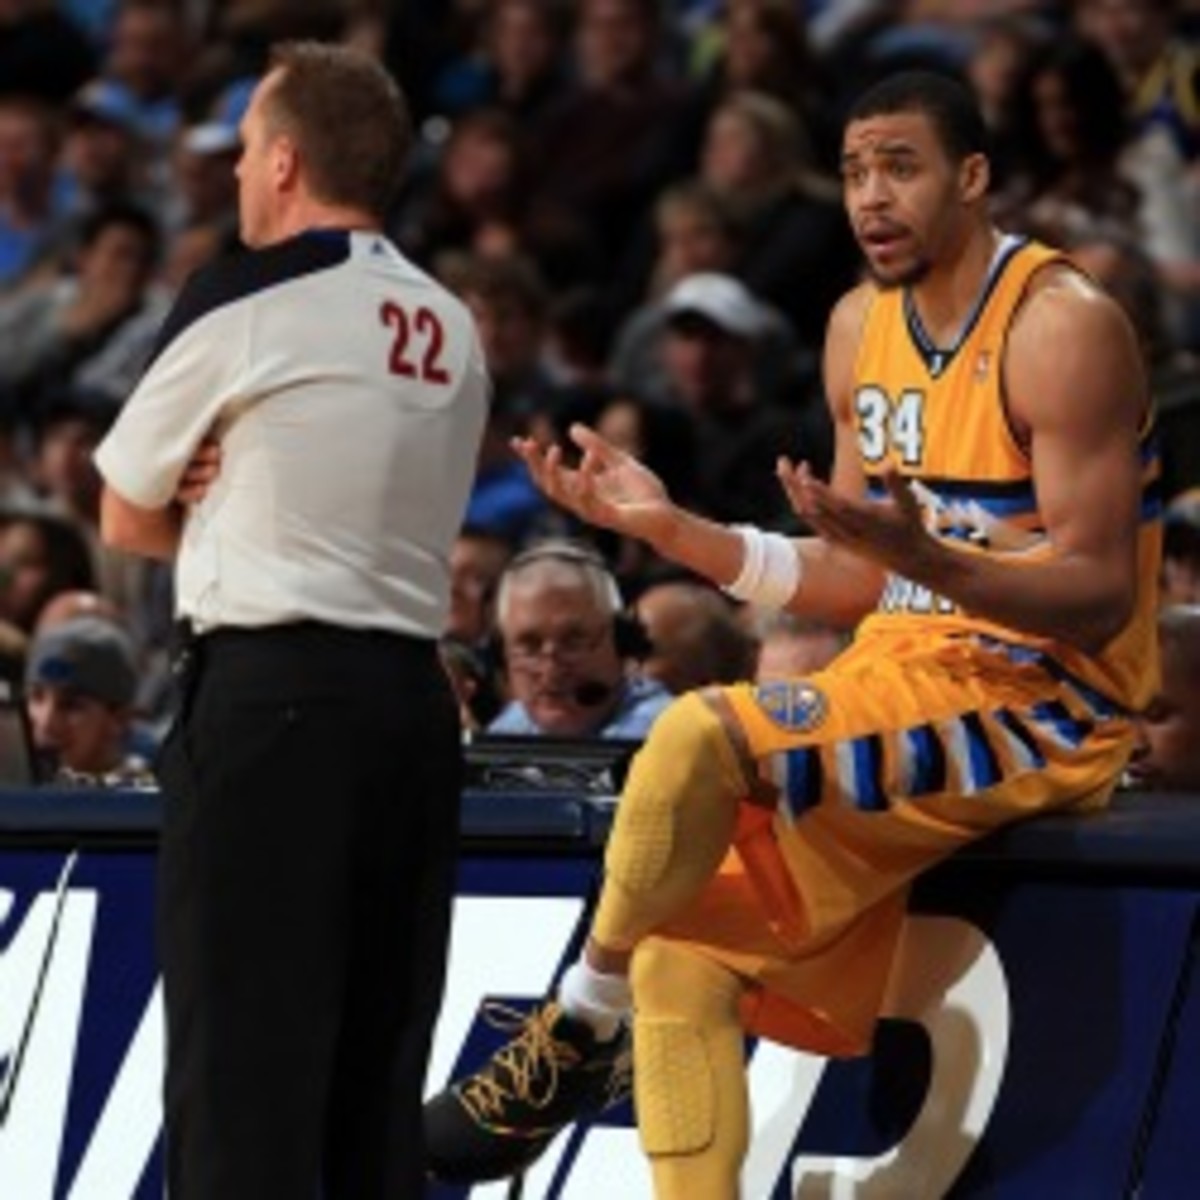 Nuggets forward JaVale McGee has seen his playing time decrease this season. (Doug Pensinger/Getty Images)